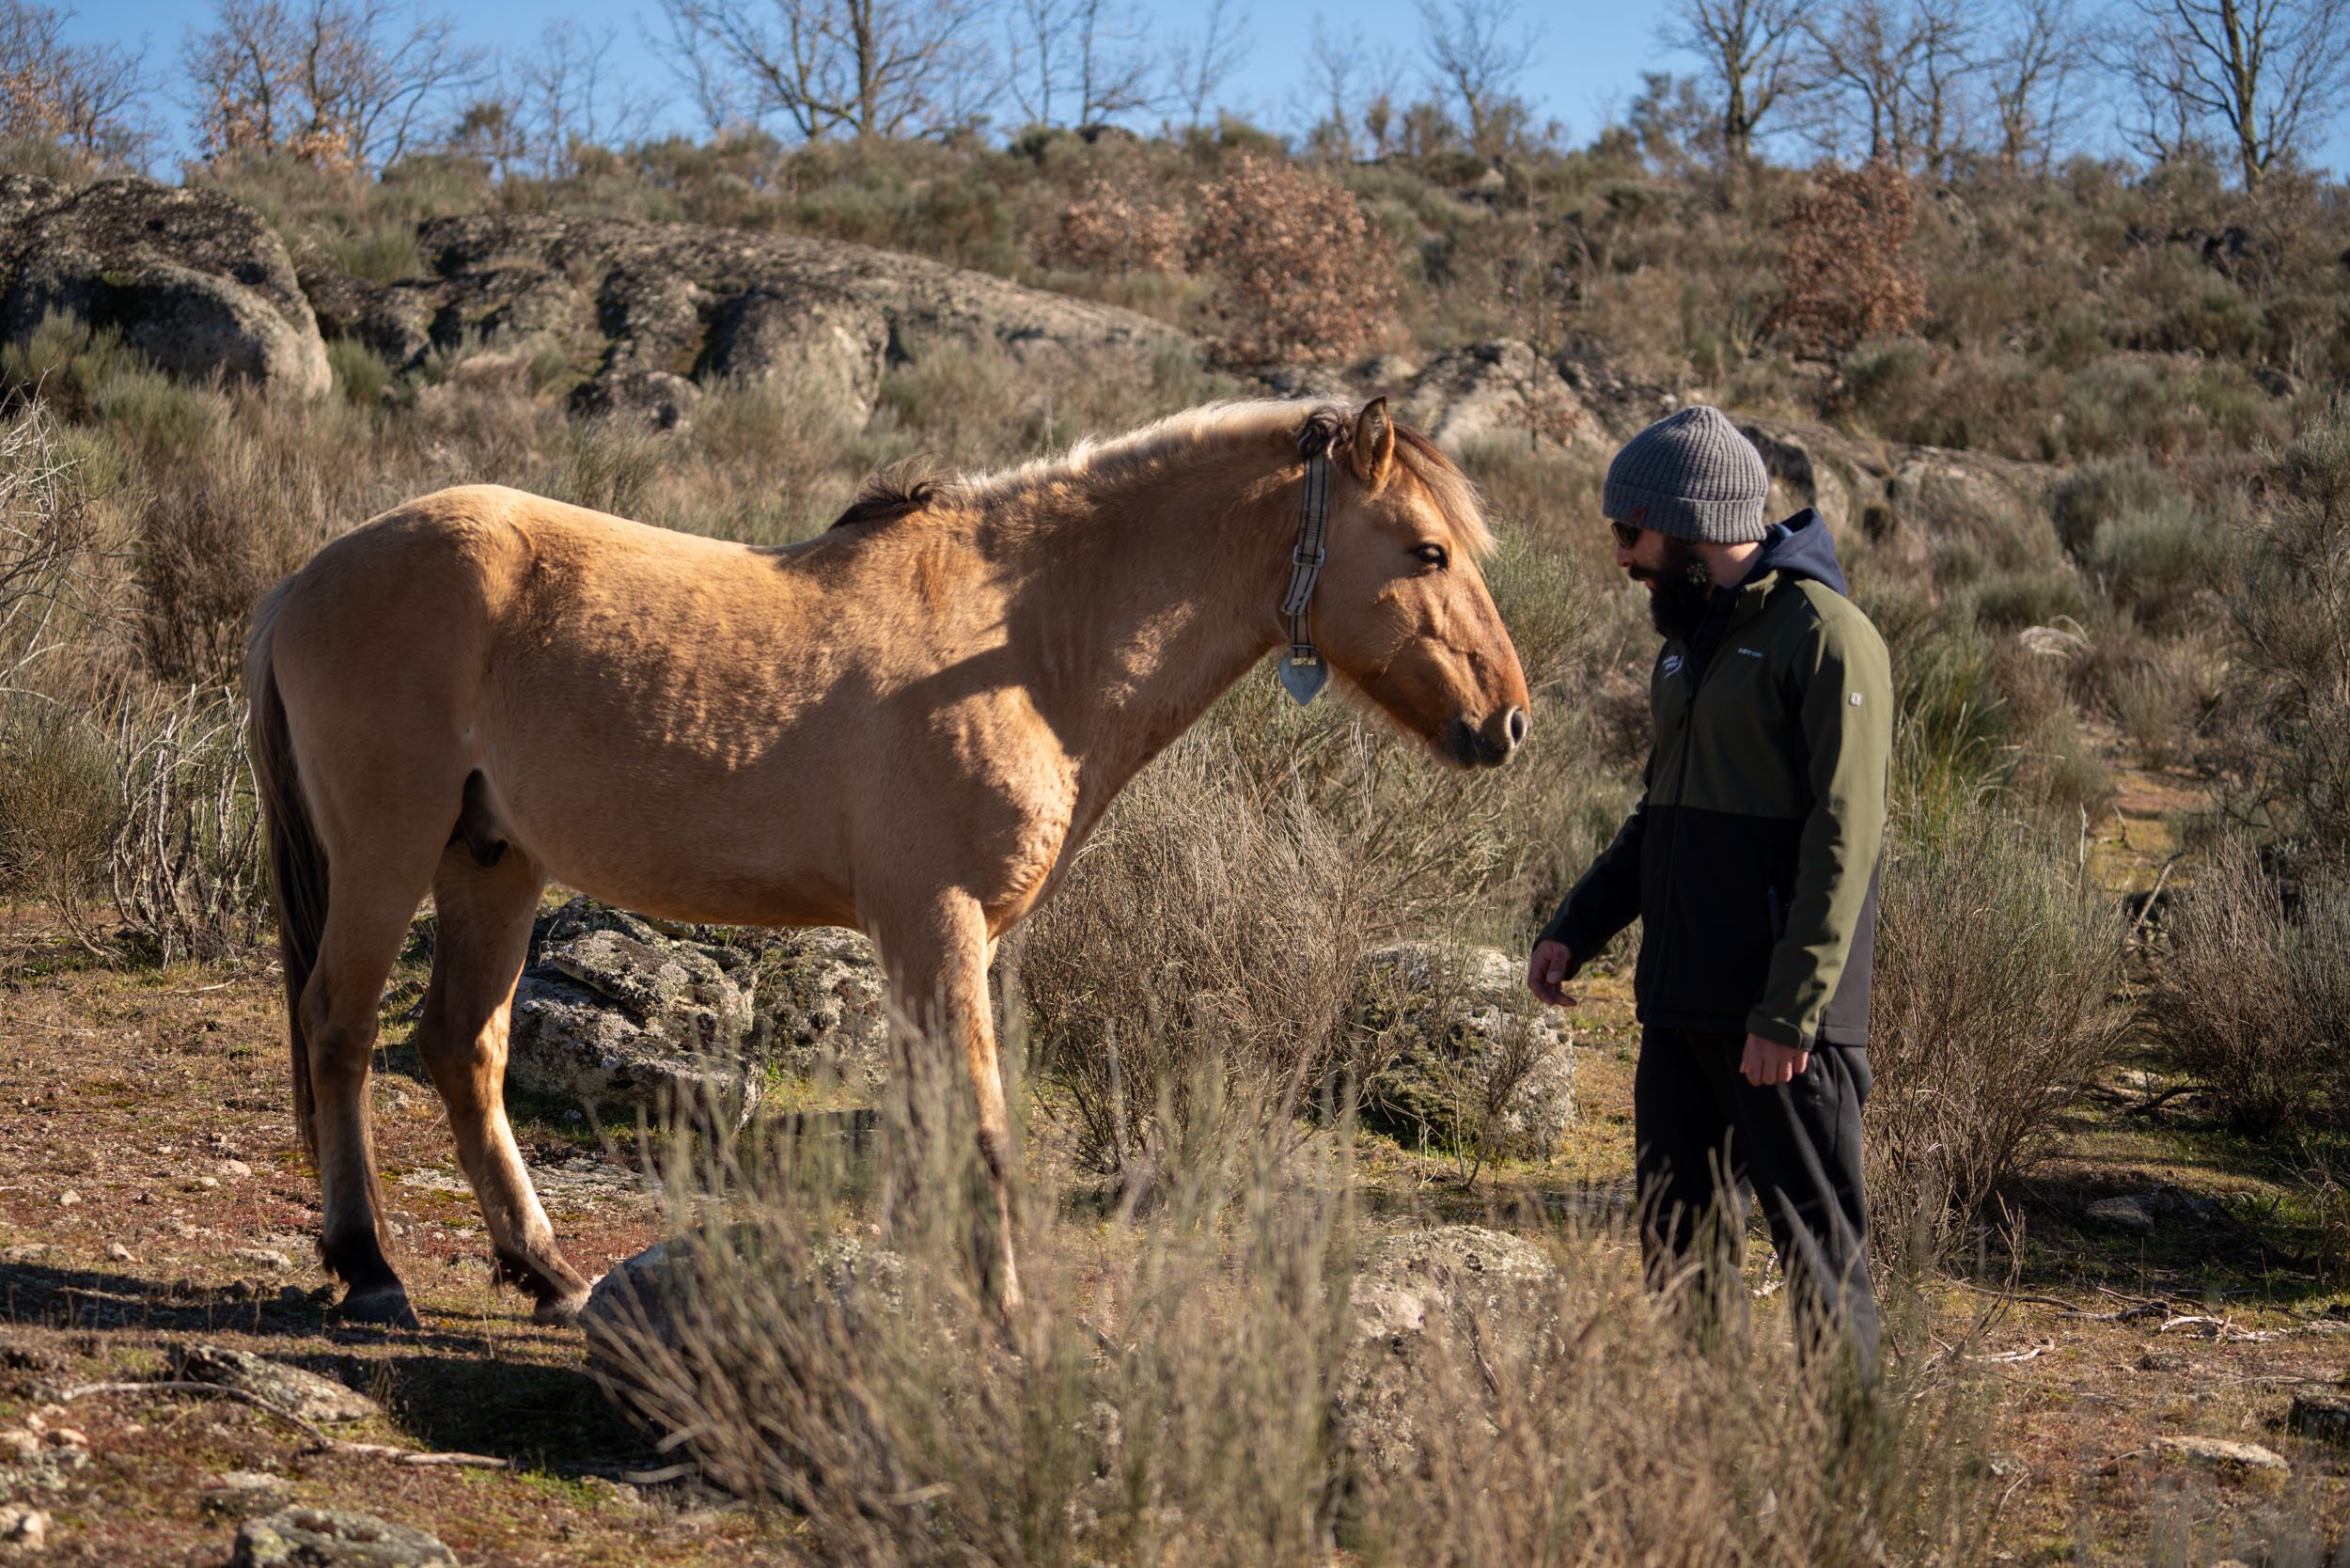 The image shows a man with a wild sorraia horse